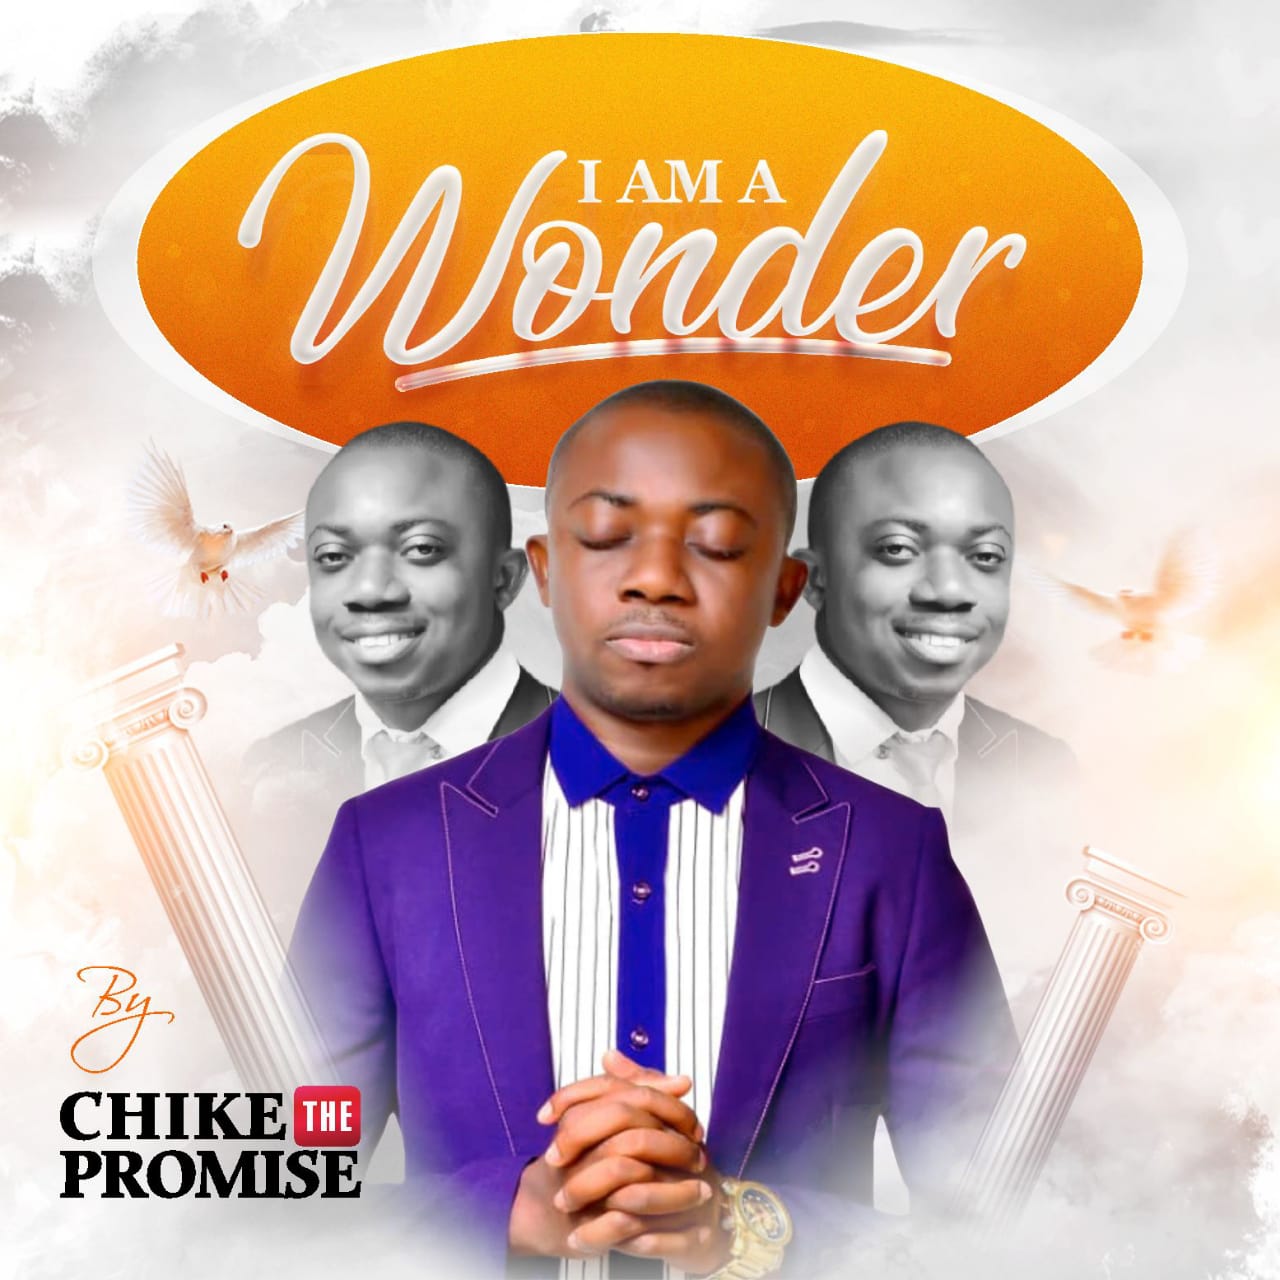 chike-the-promise-drops-new-song-&-video-“i-am-a-wonder”